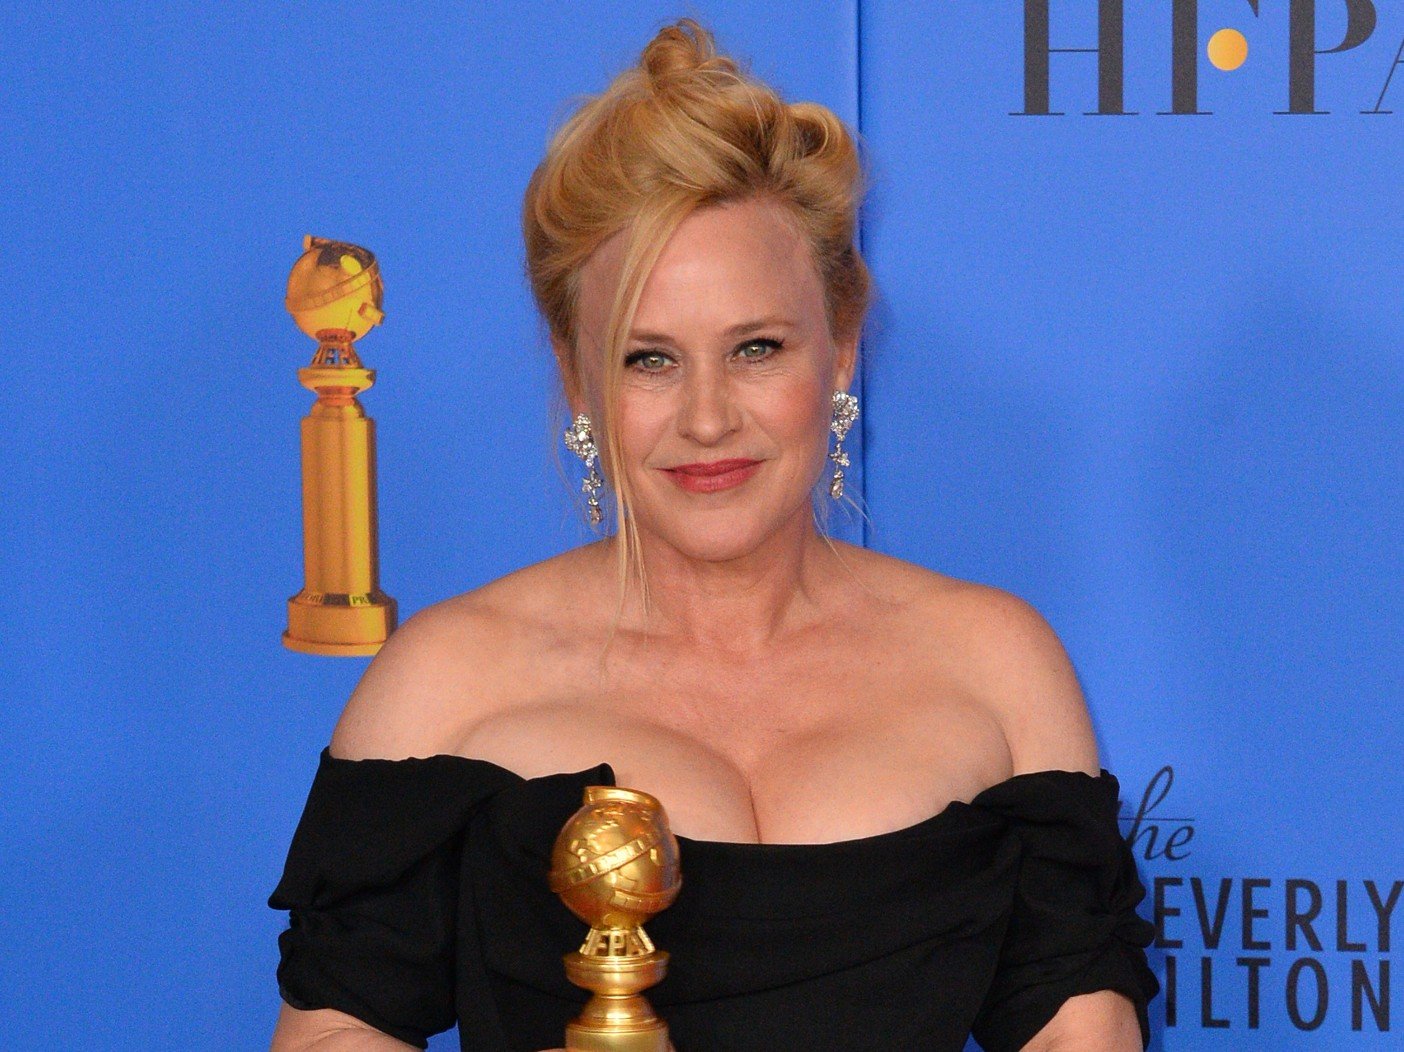 Patricia Arquette Looked Like ’90s Prom Queen In Early Red Carpet Outfit